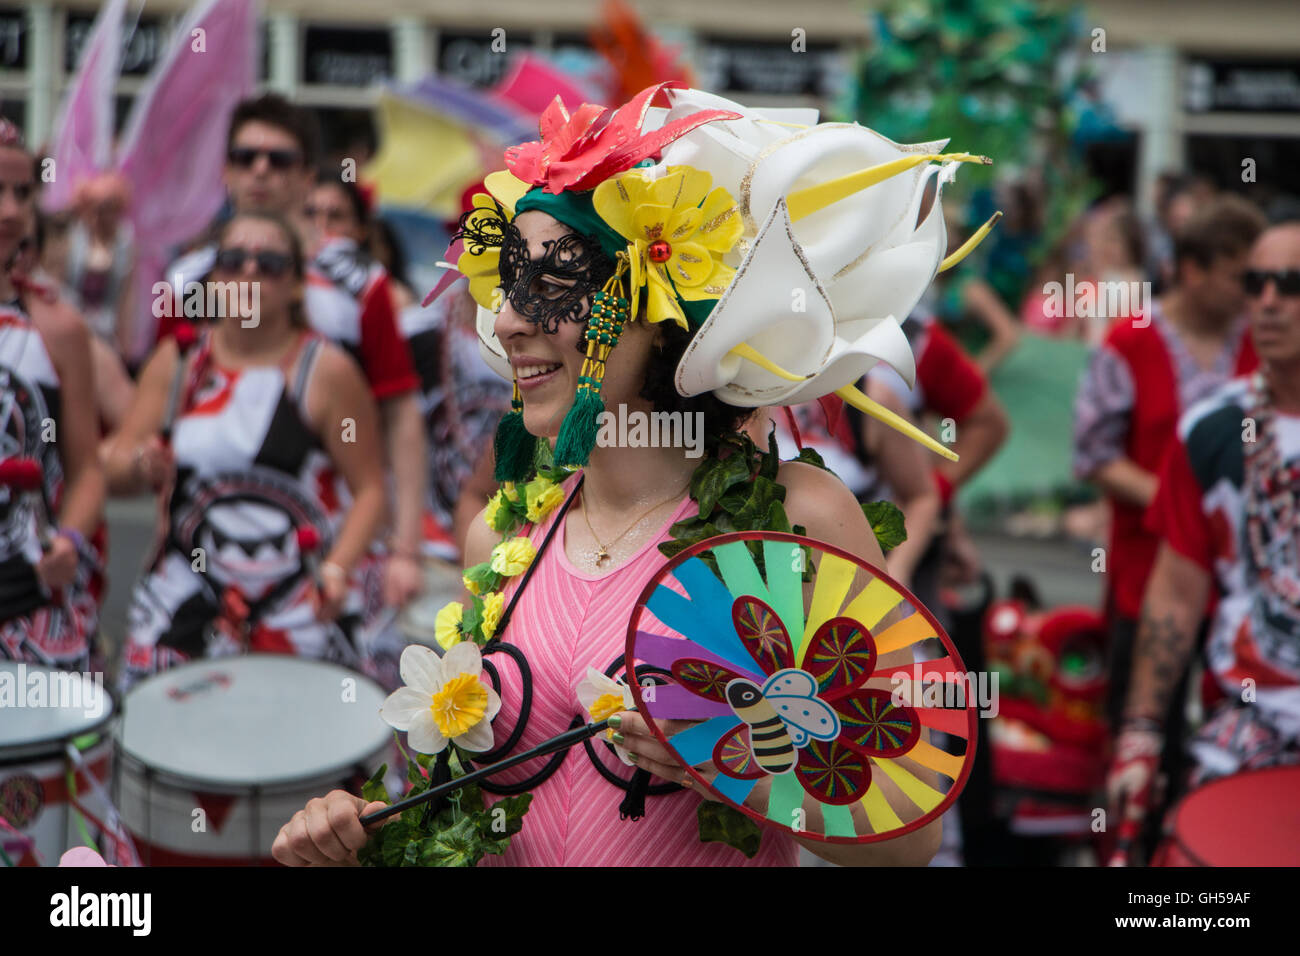 Woman in elaborate costume taking part in the 2016 Bath Street Carnival, UK Stock Photo